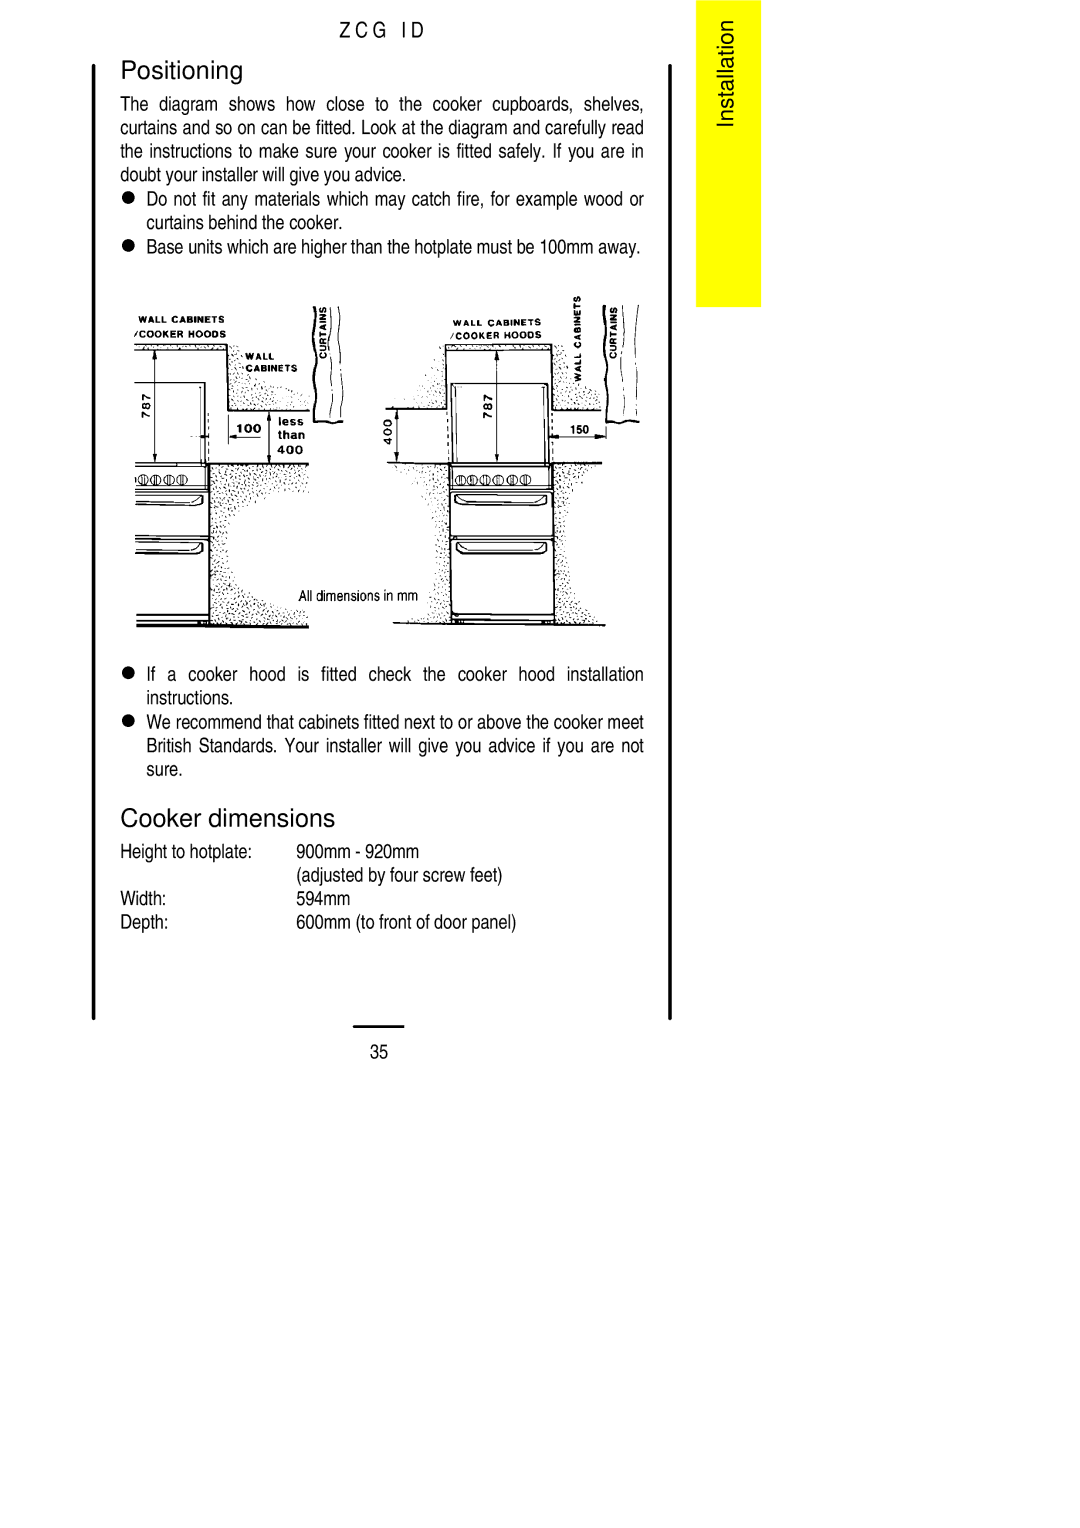 Zanussi ZCG ID manual Positioning, Cooker dimensions, Curtains behind the cooker, Height to hotplate 900mm 920mm 